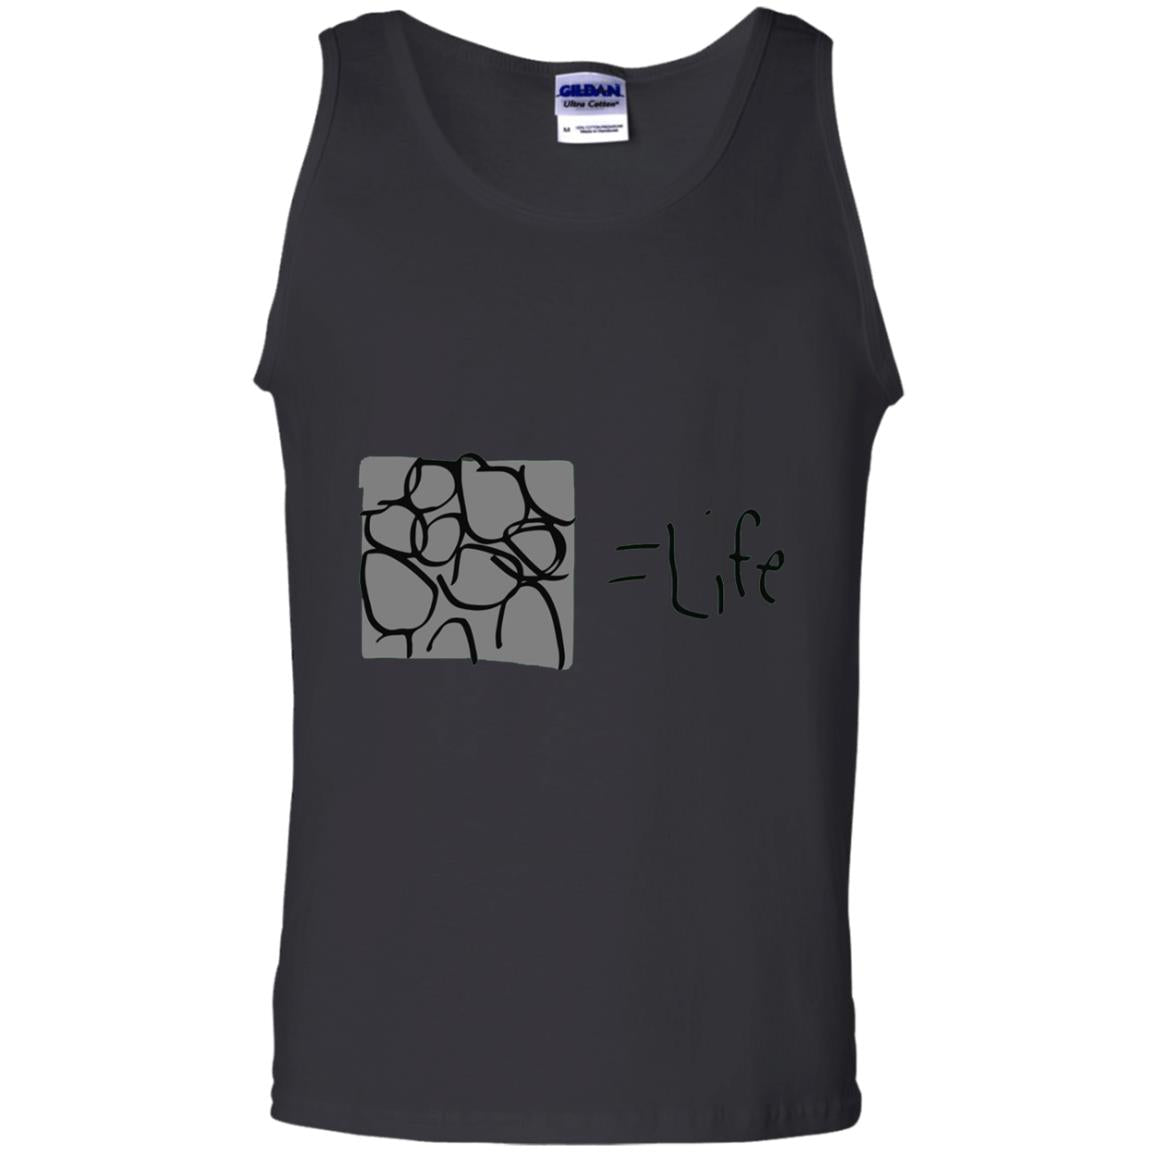 Cobblestone Equals Life Video Game Gamers Shirt